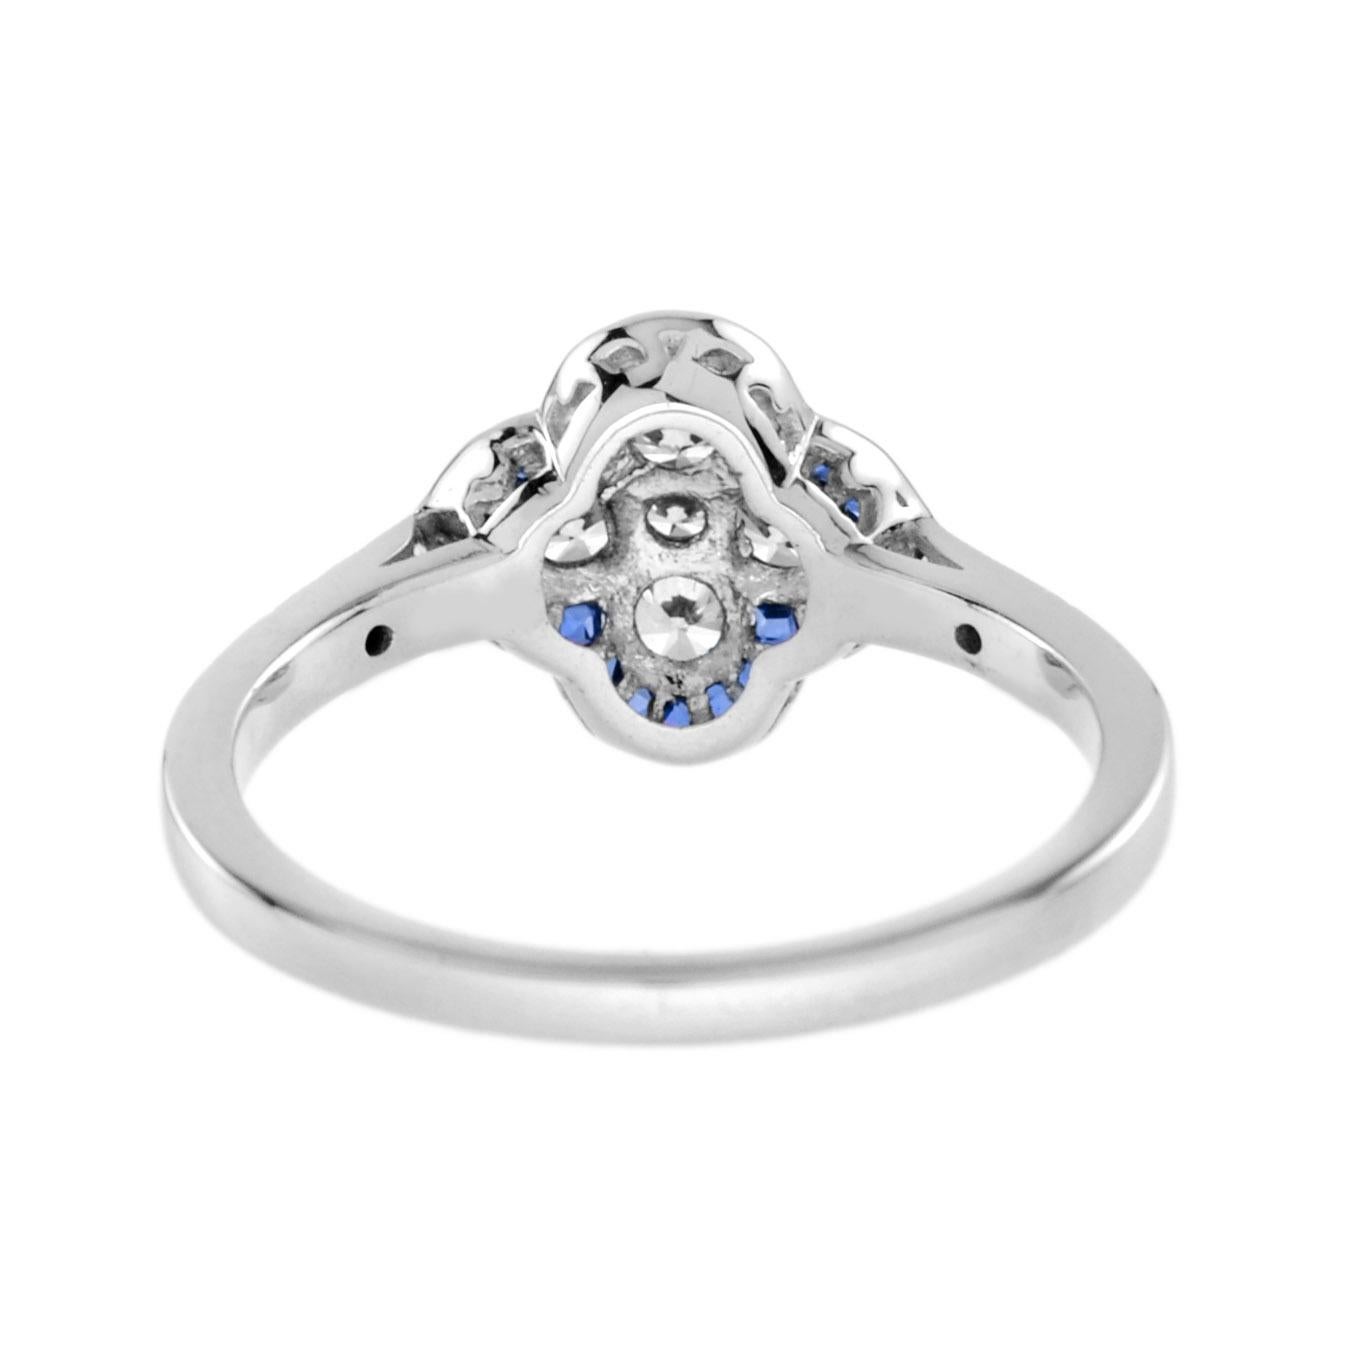 For Sale:  Diamond and Blue Sapphire Art Deco Style Floral Ring in 18K White Gold 4